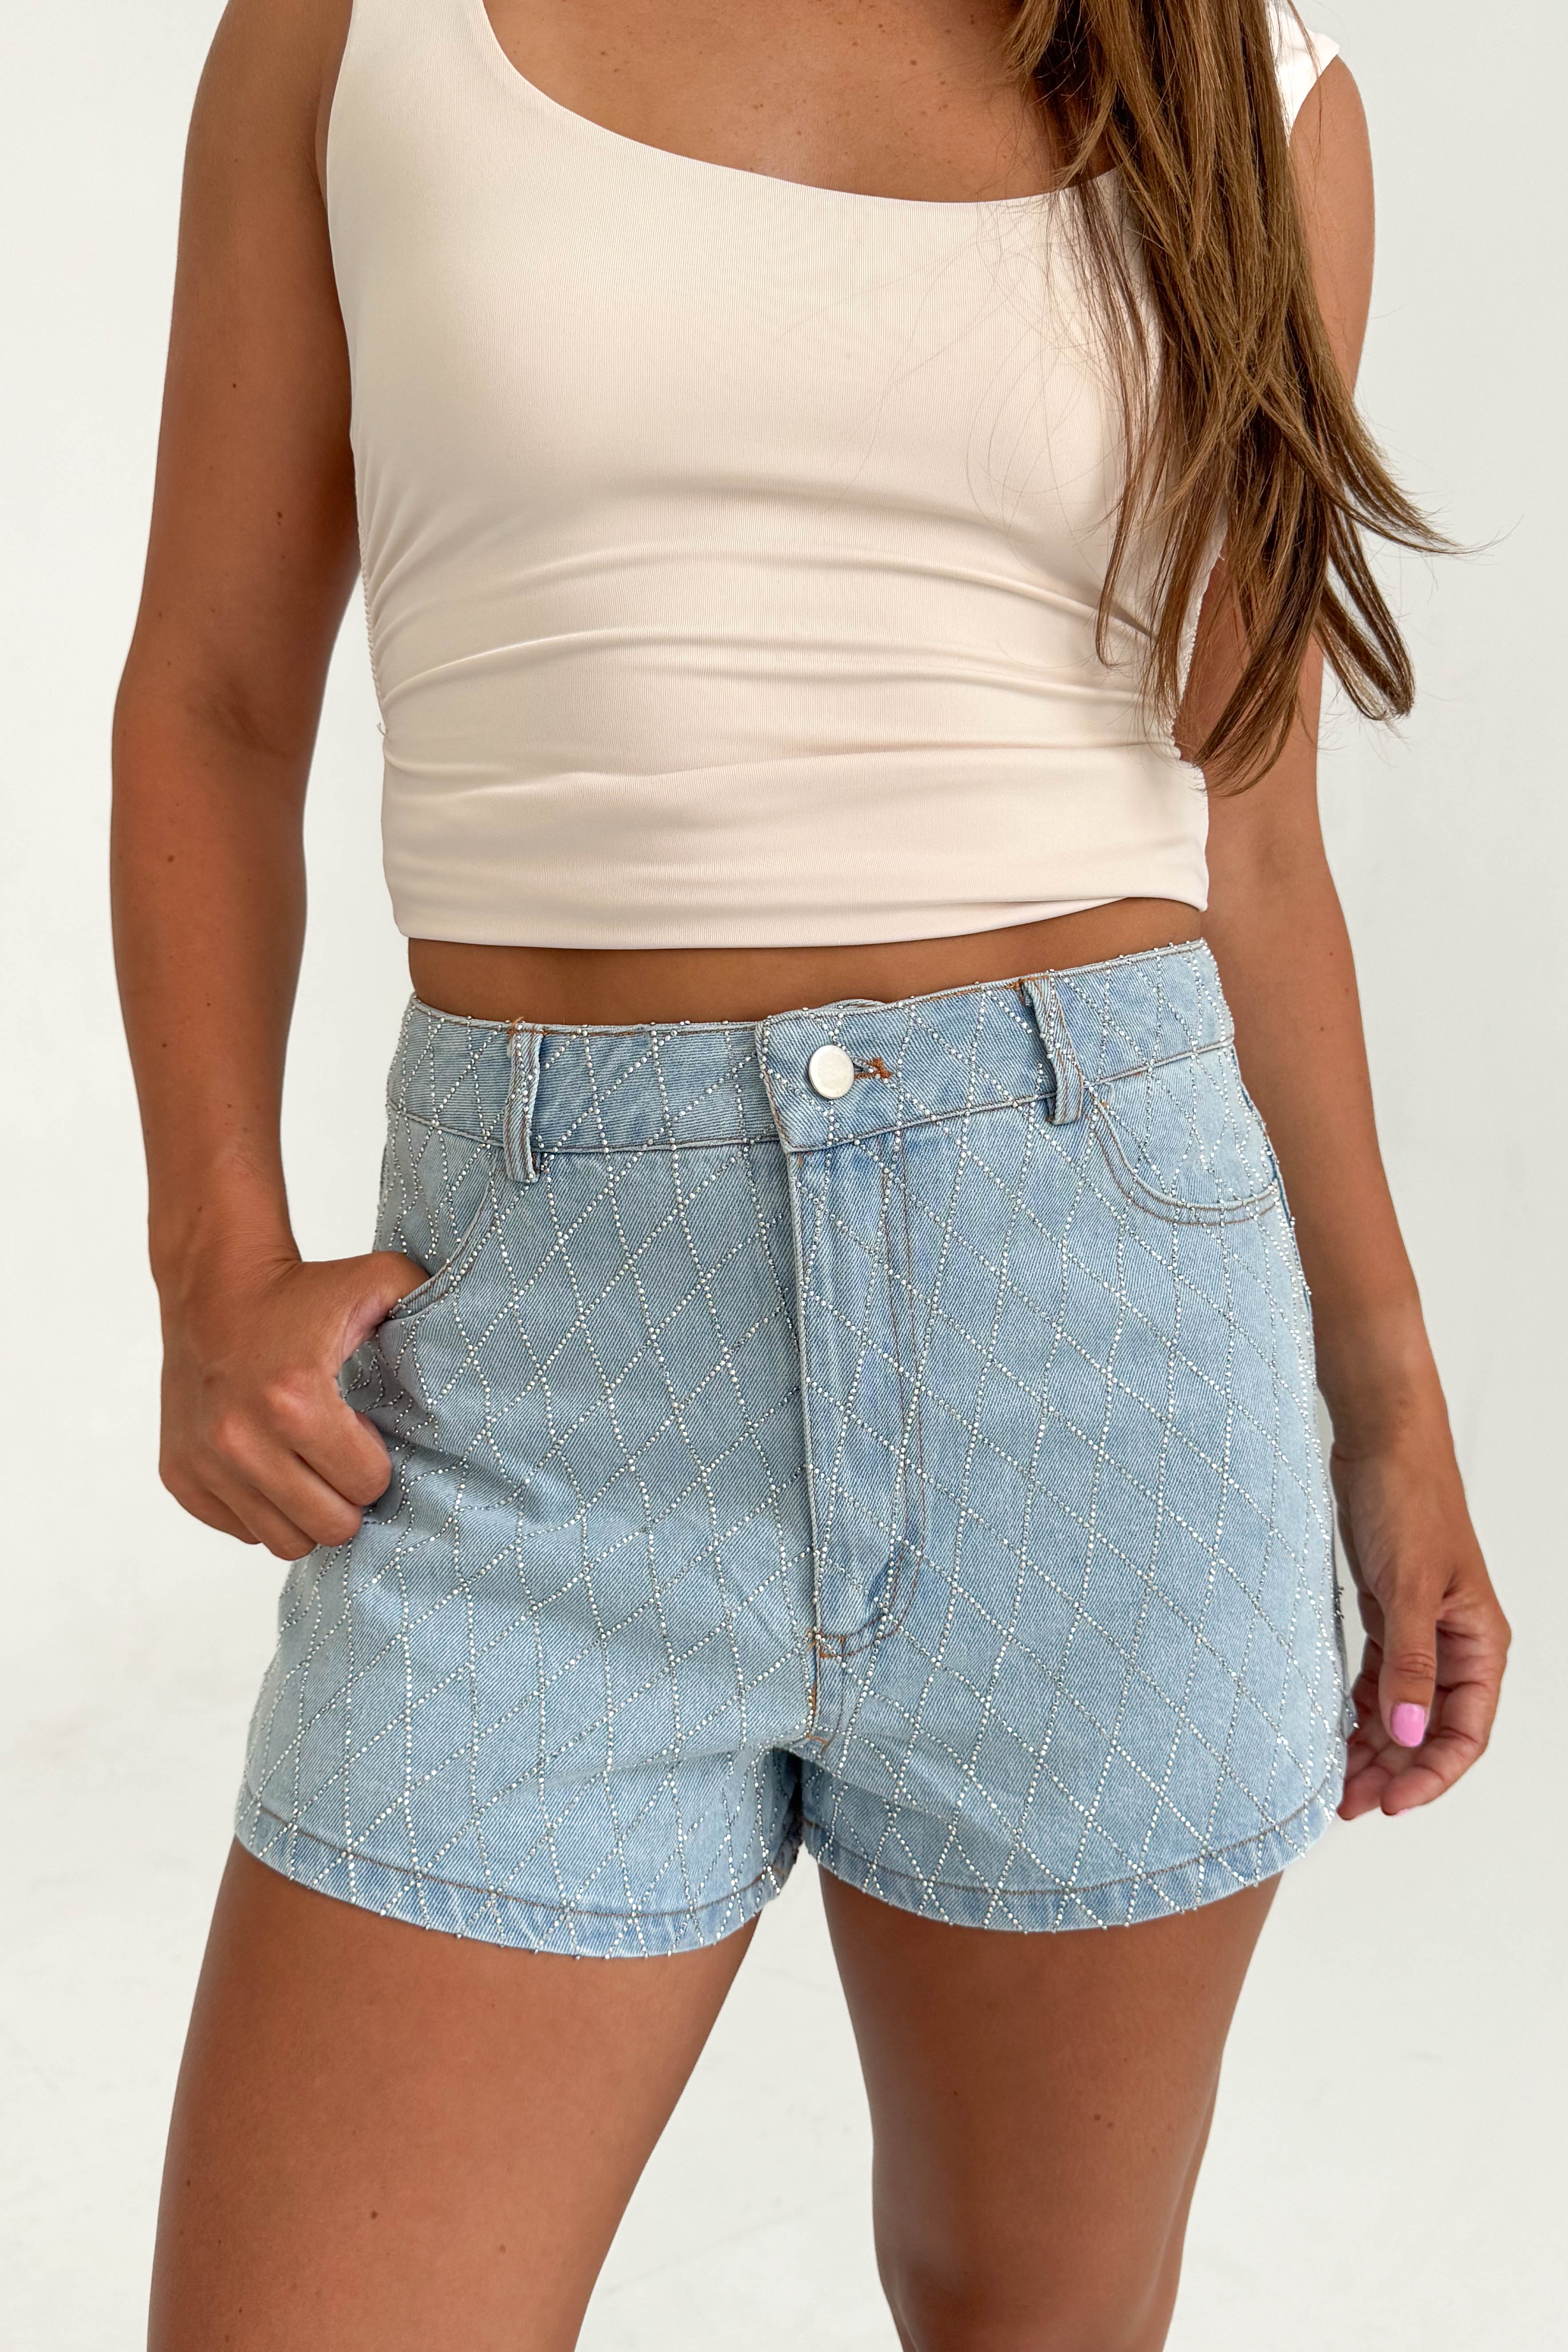 Sparks Fly Shorts